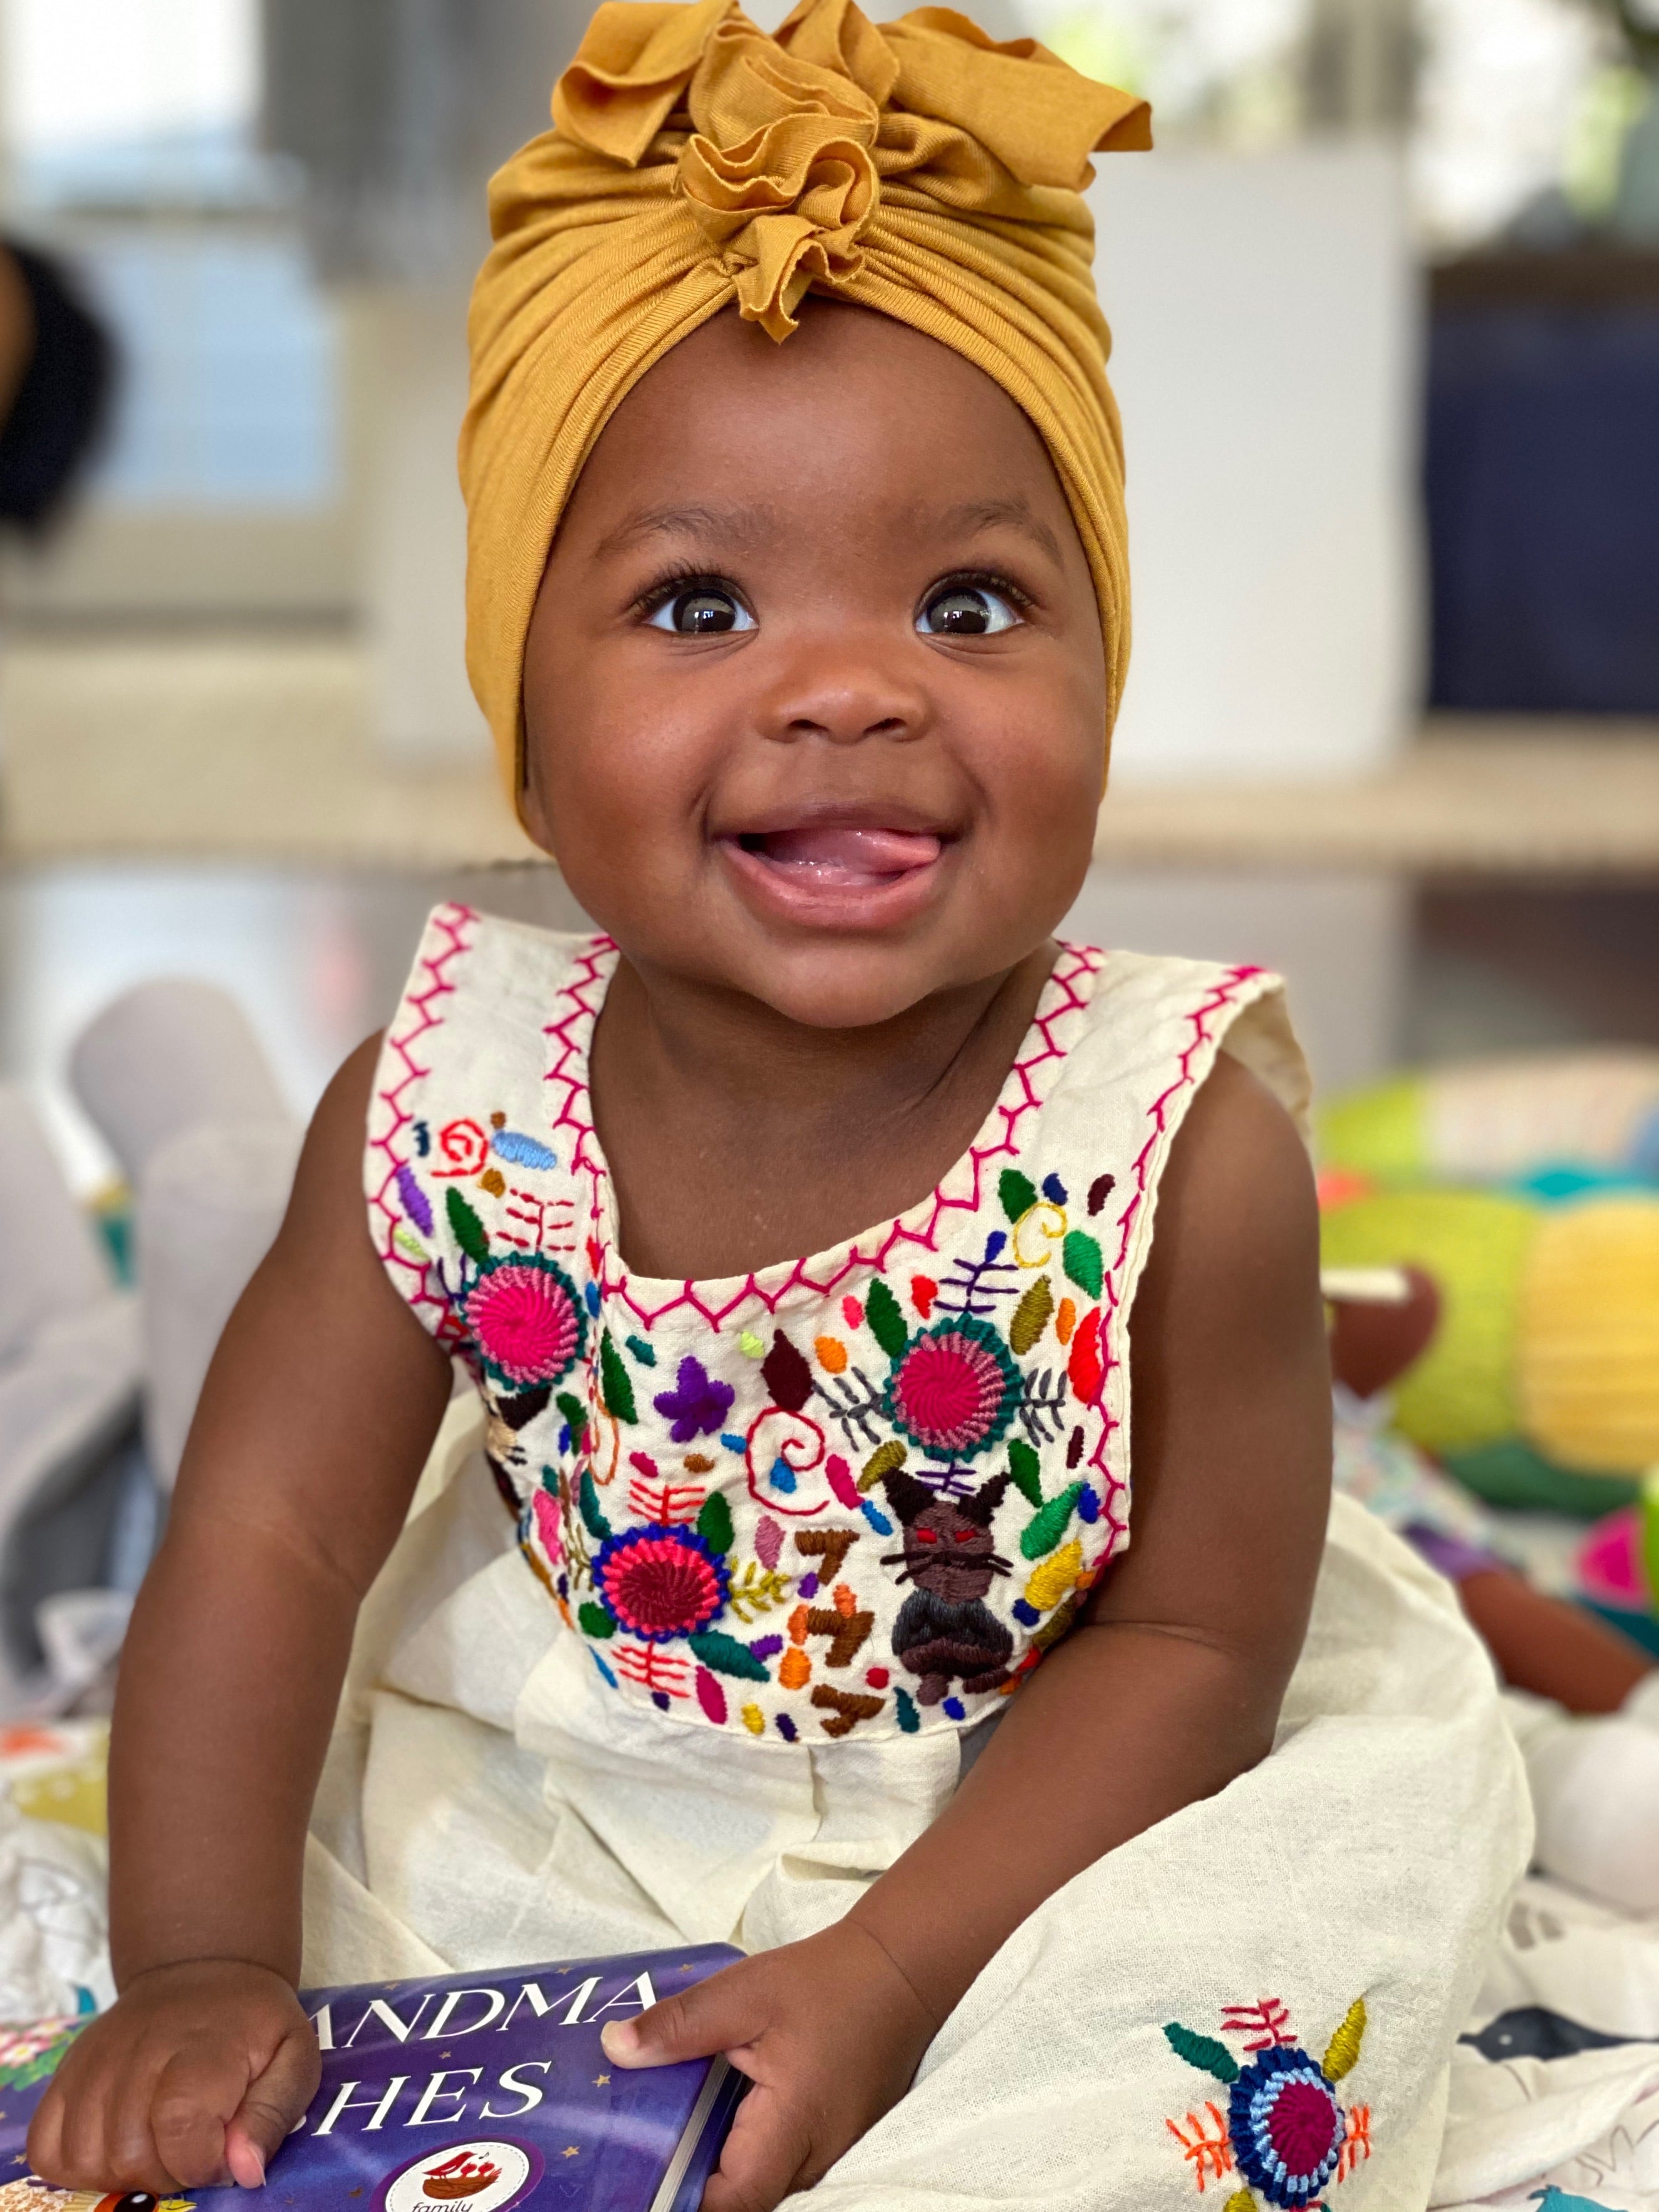 Meet Magnolia, the 2020 Gerber baby and 1st adopted baby in company's  history - Good Morning America